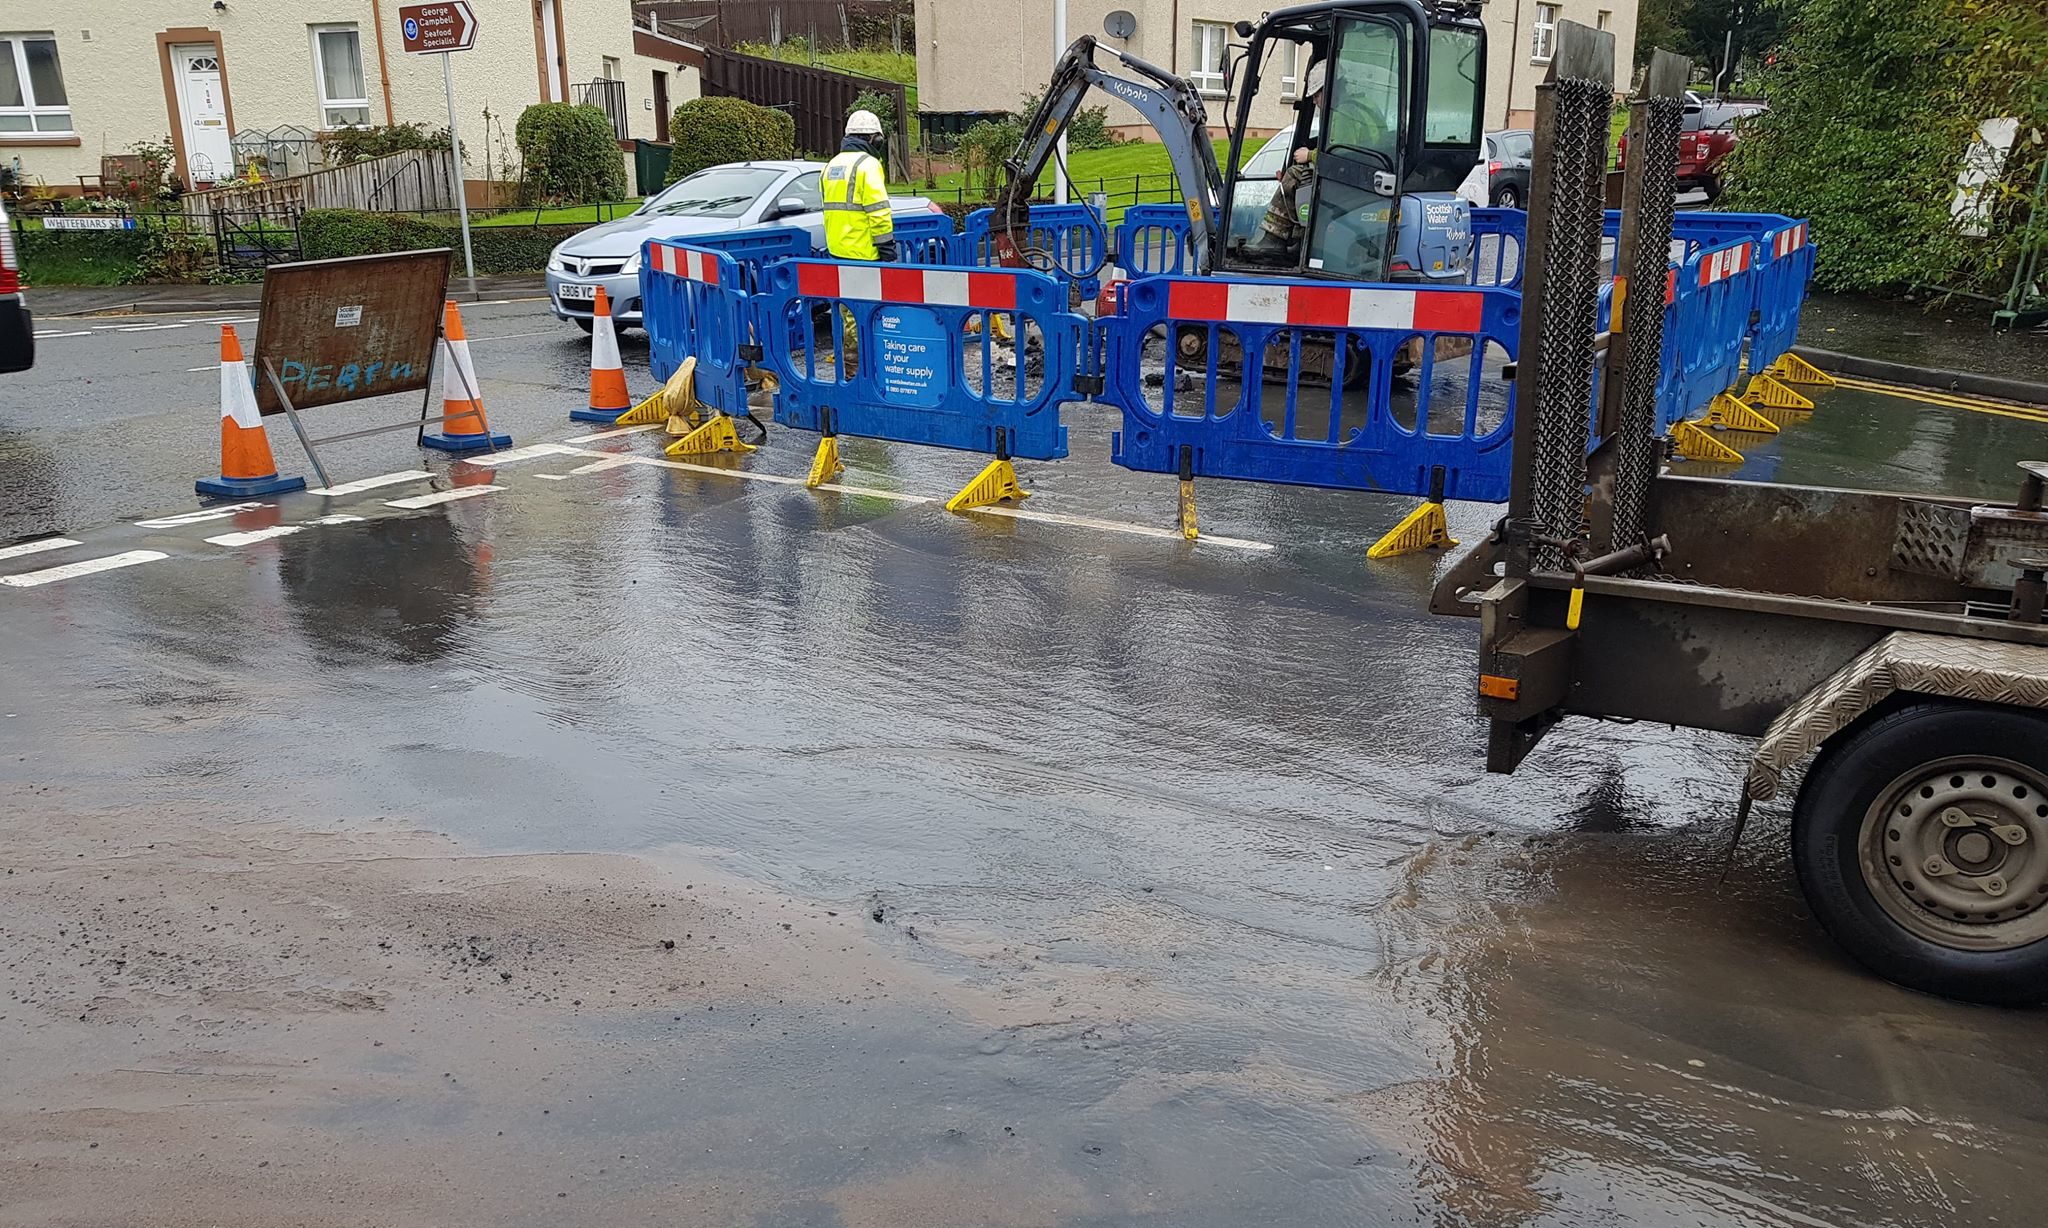 The burst water main on Riggs Road.